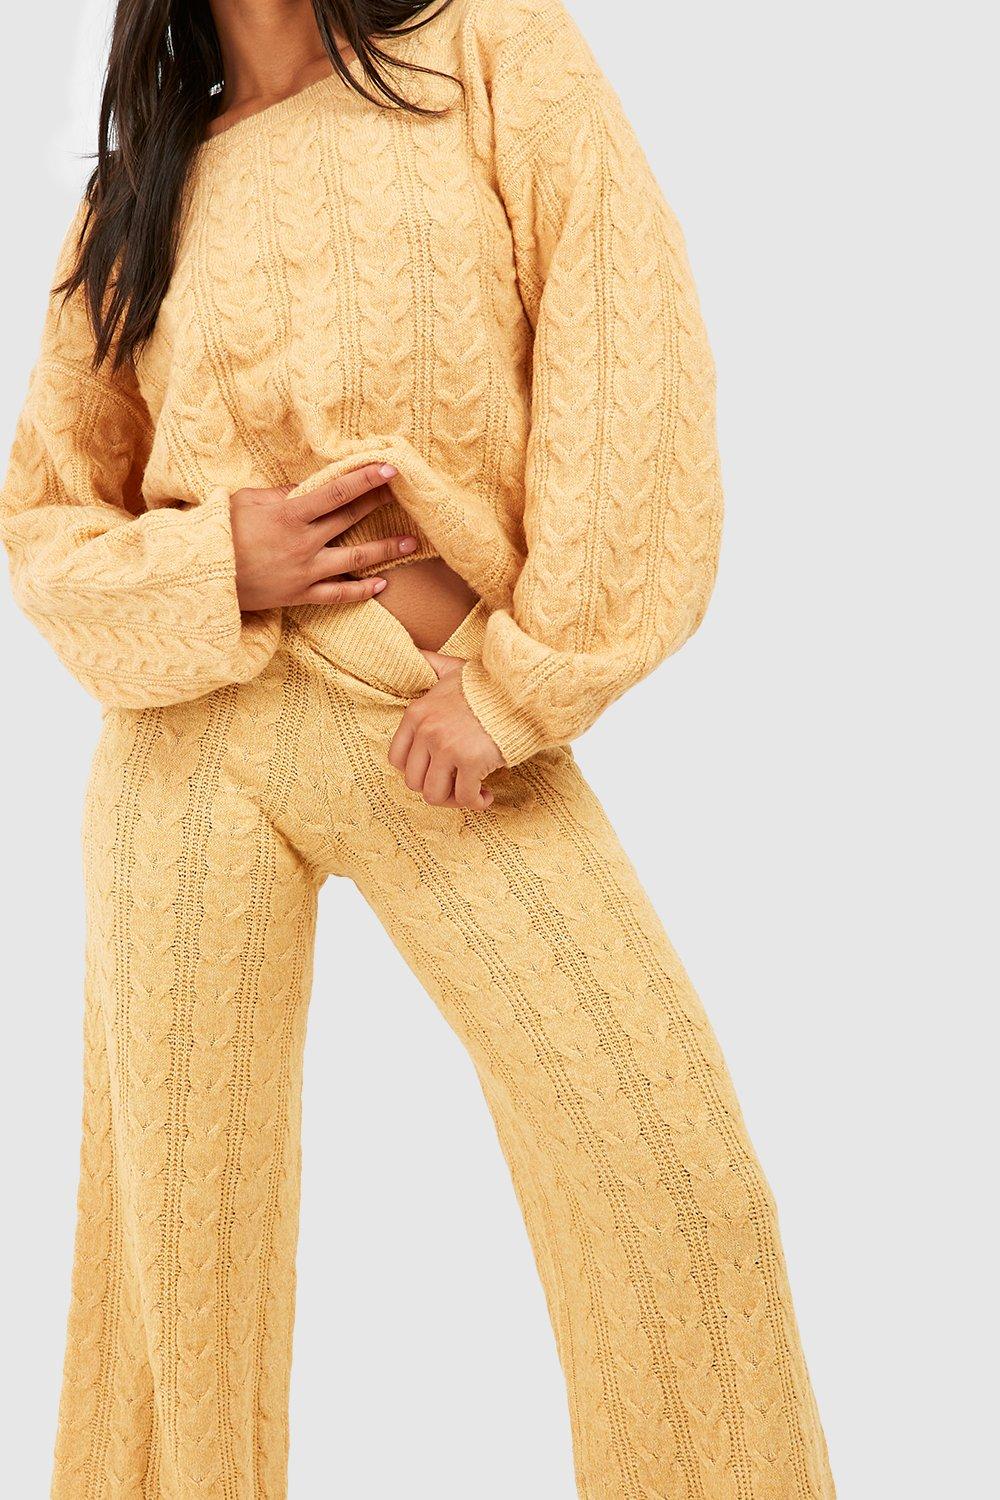 Petite Cream Cable Knit Flared Pants